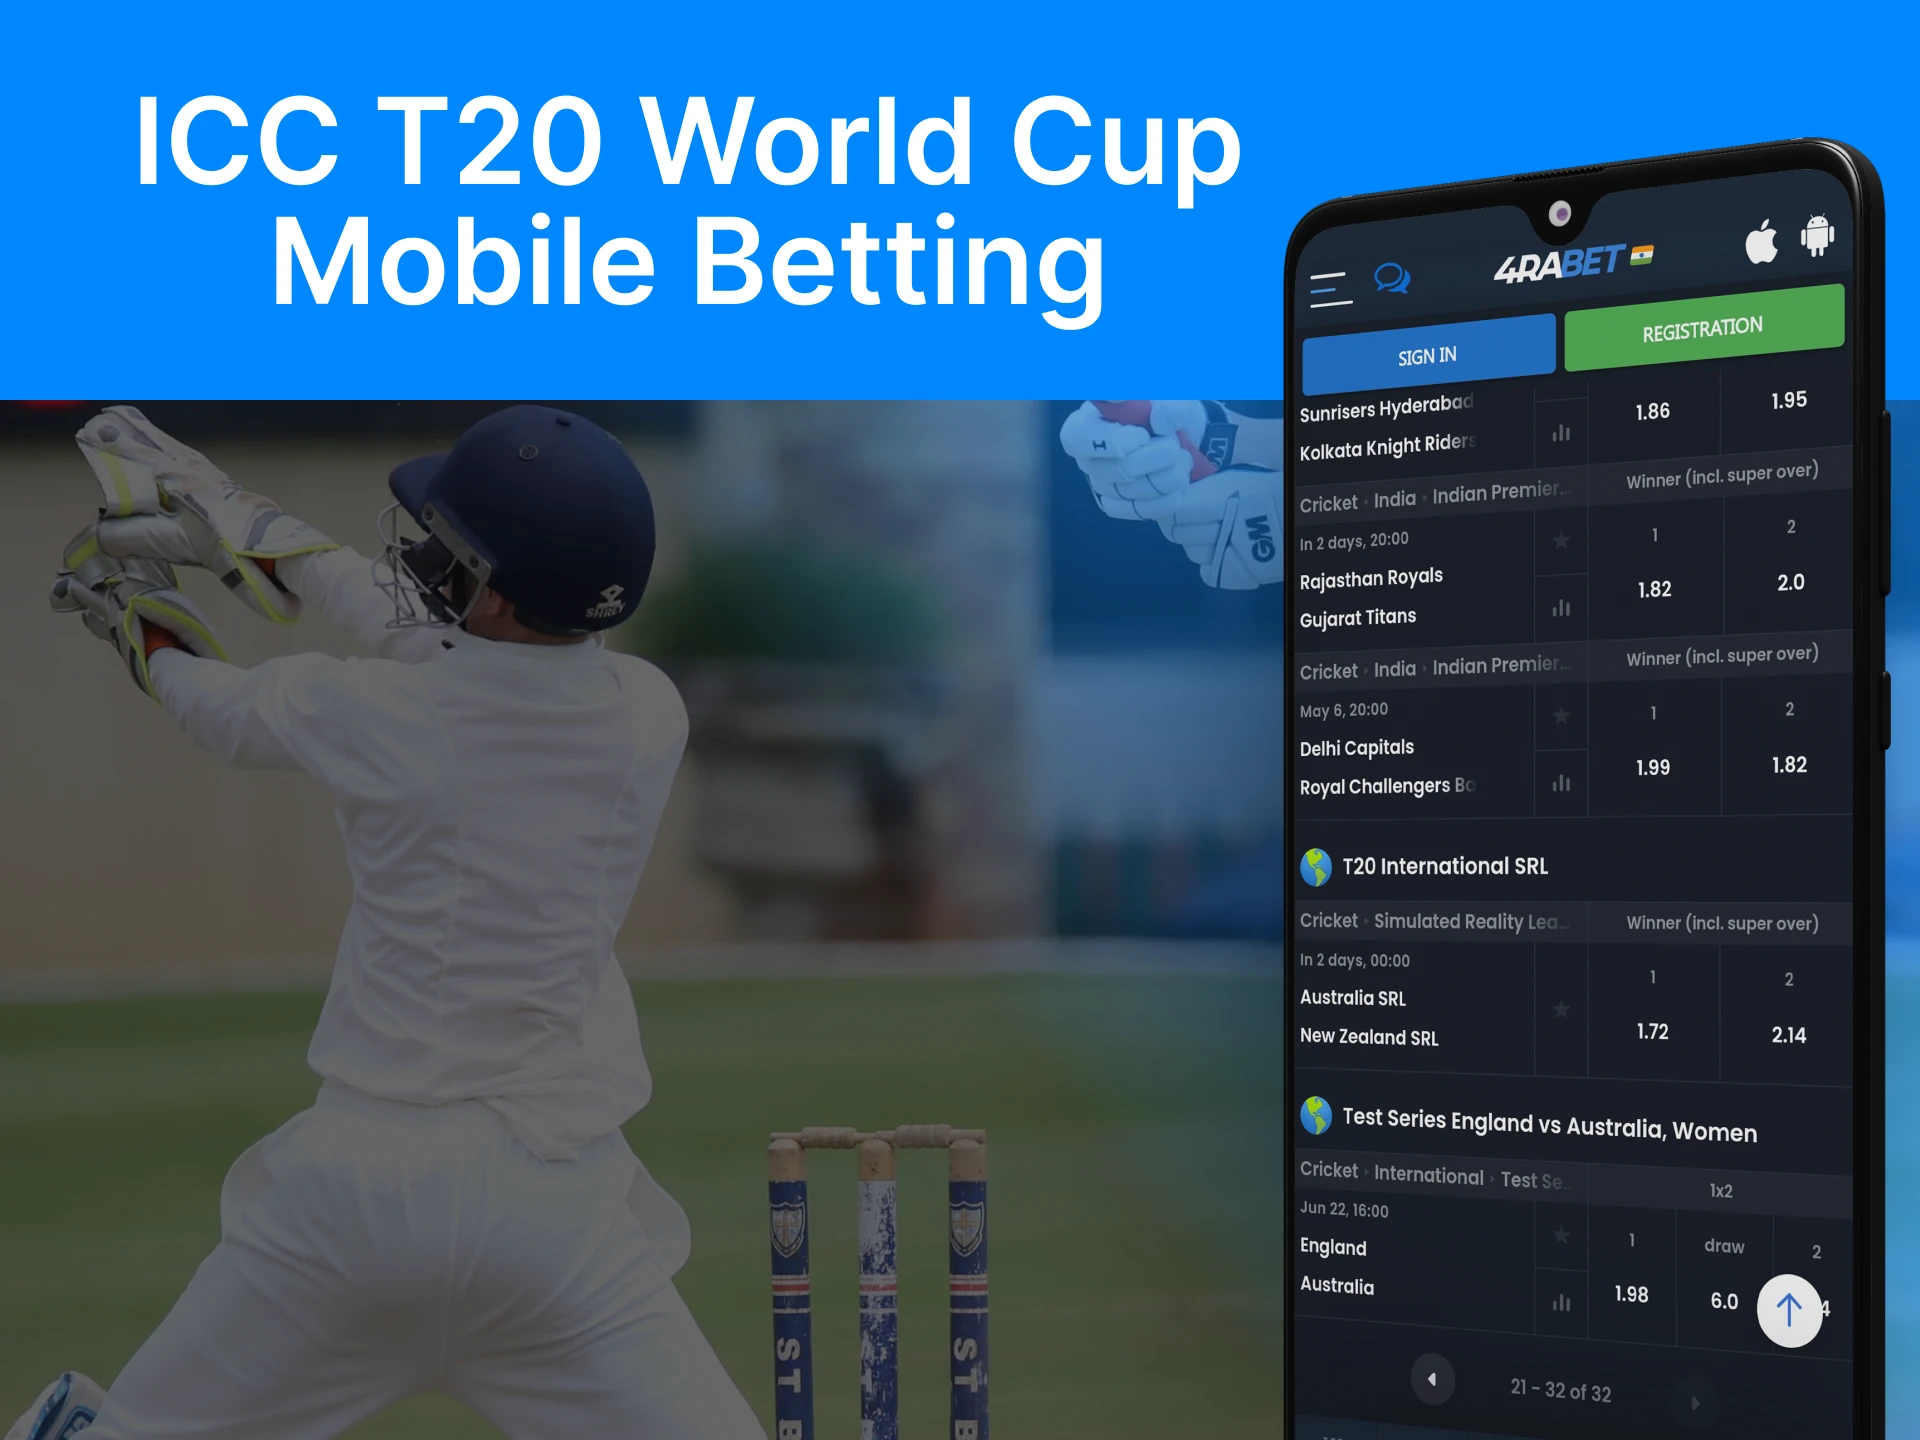 Bookmakers always provide all the events of the ICC T20 World Cup in the apps.